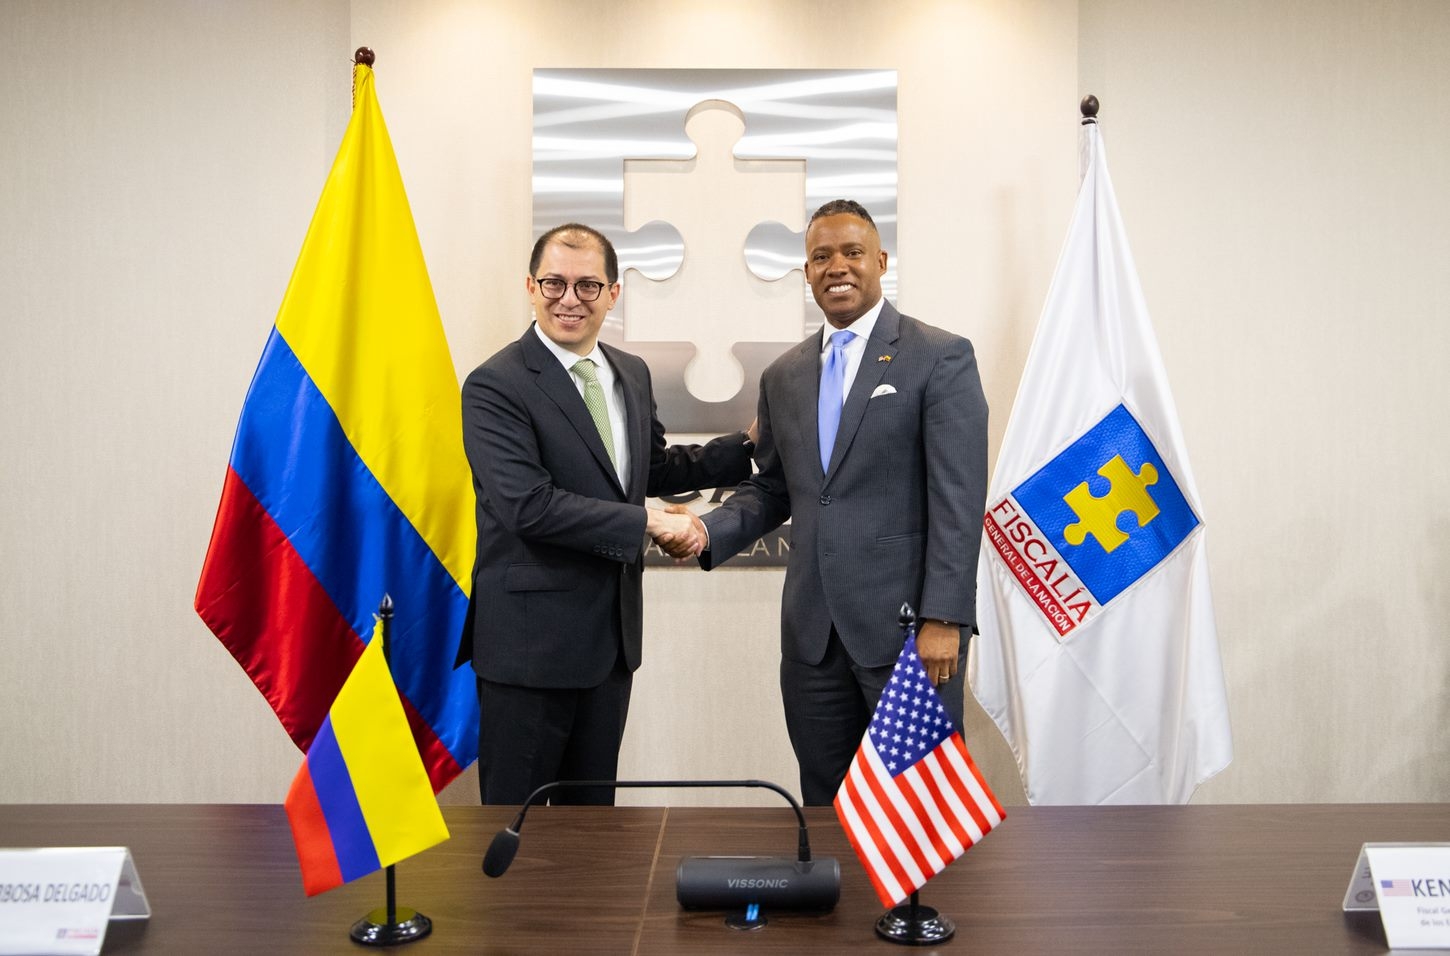 Colombian Attorney General Francisco Barbosa and AAG Polite